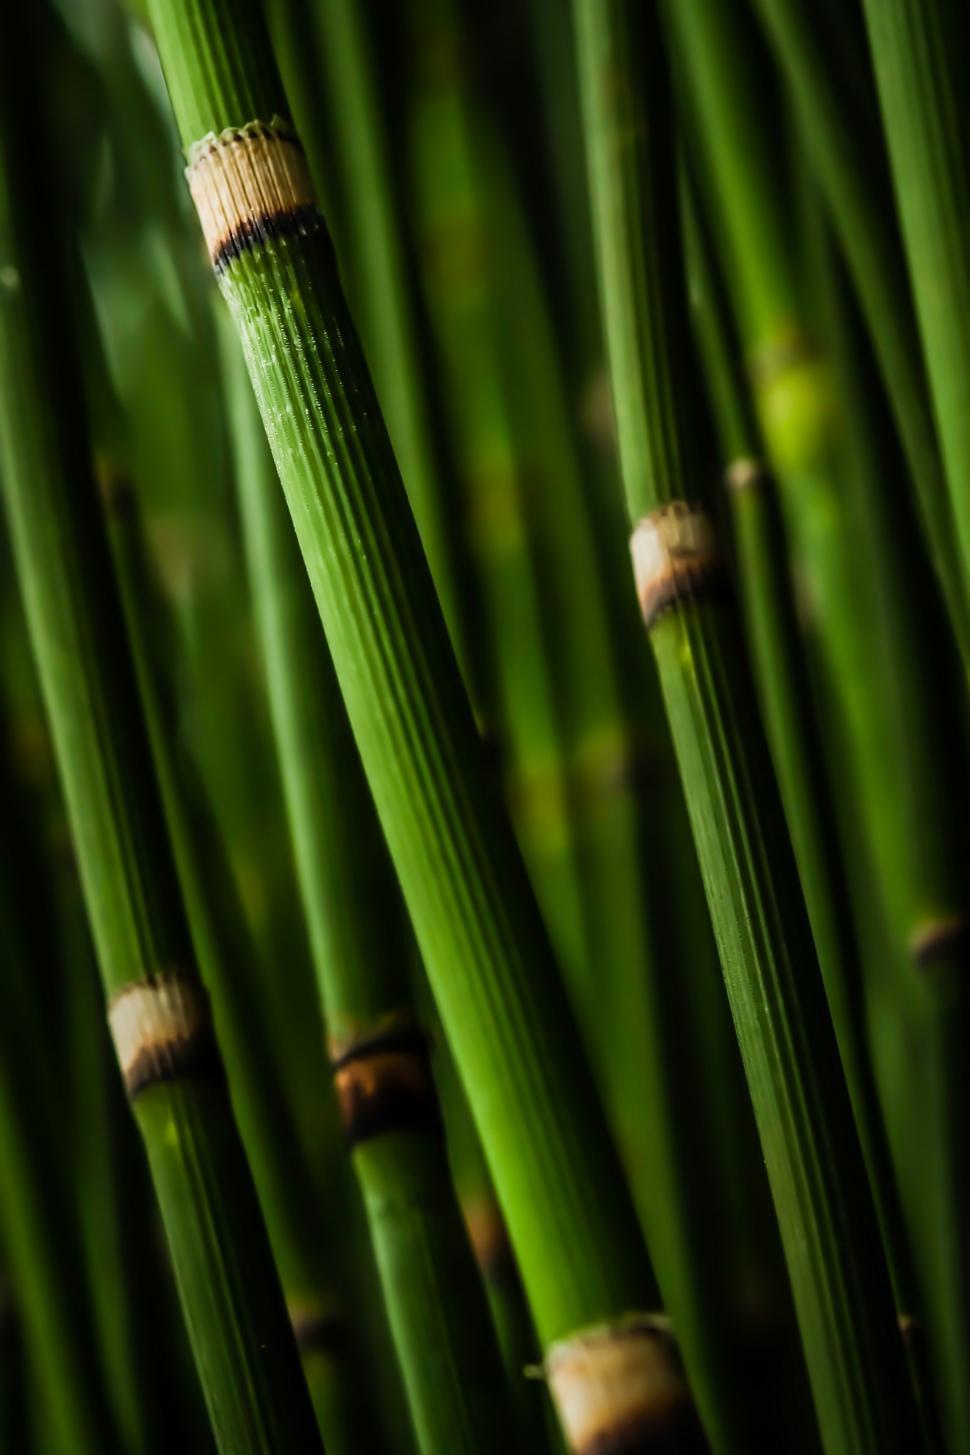 Free Image of Close-Up of Green Bamboo Stalks 